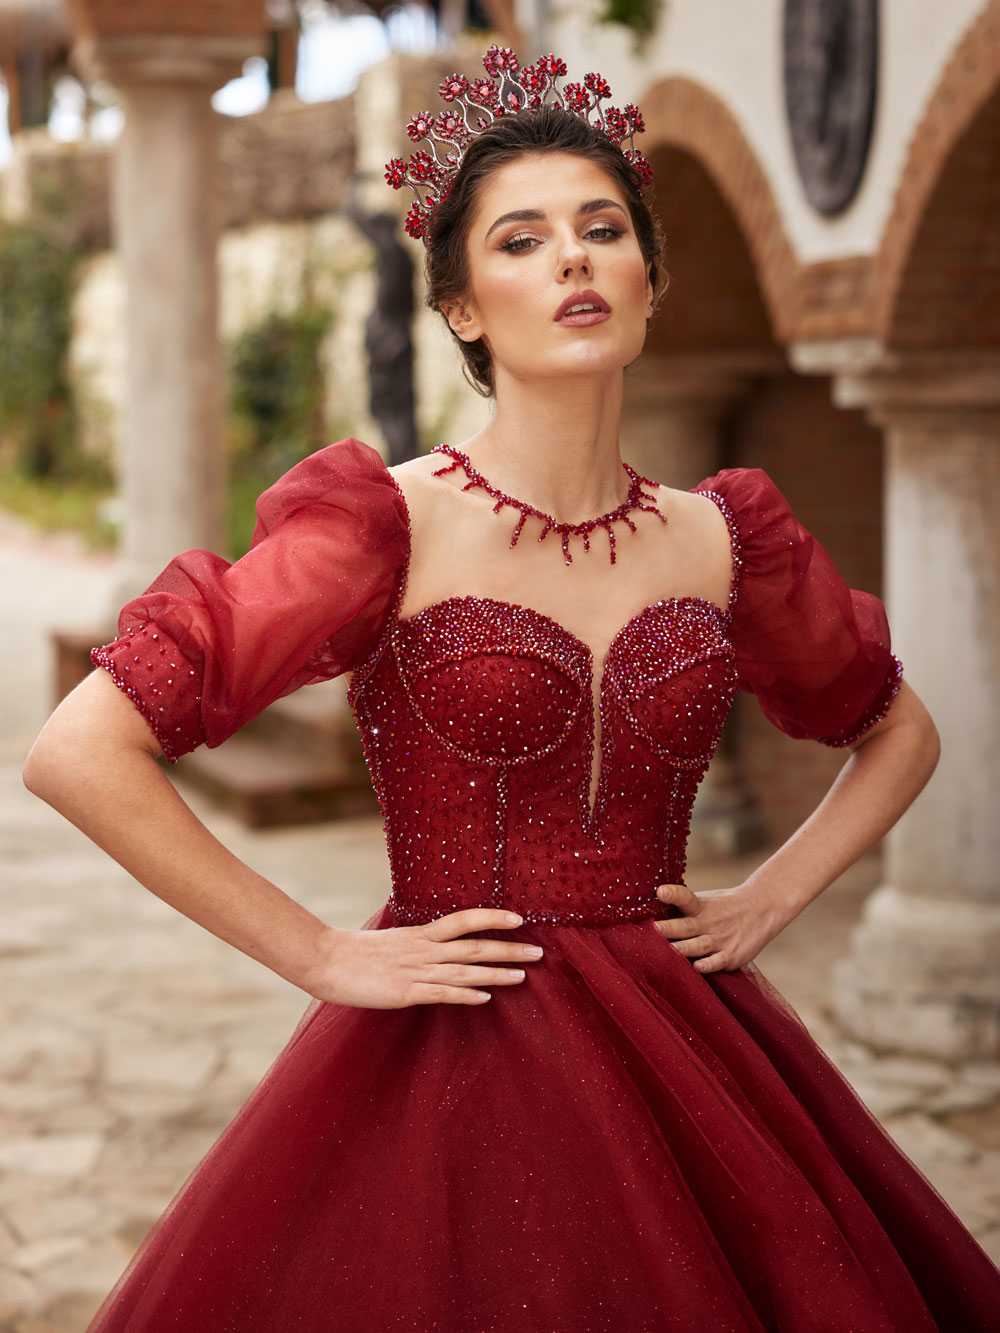 Woman Wearing a Red Gown and a Crown · Free Stock Photo